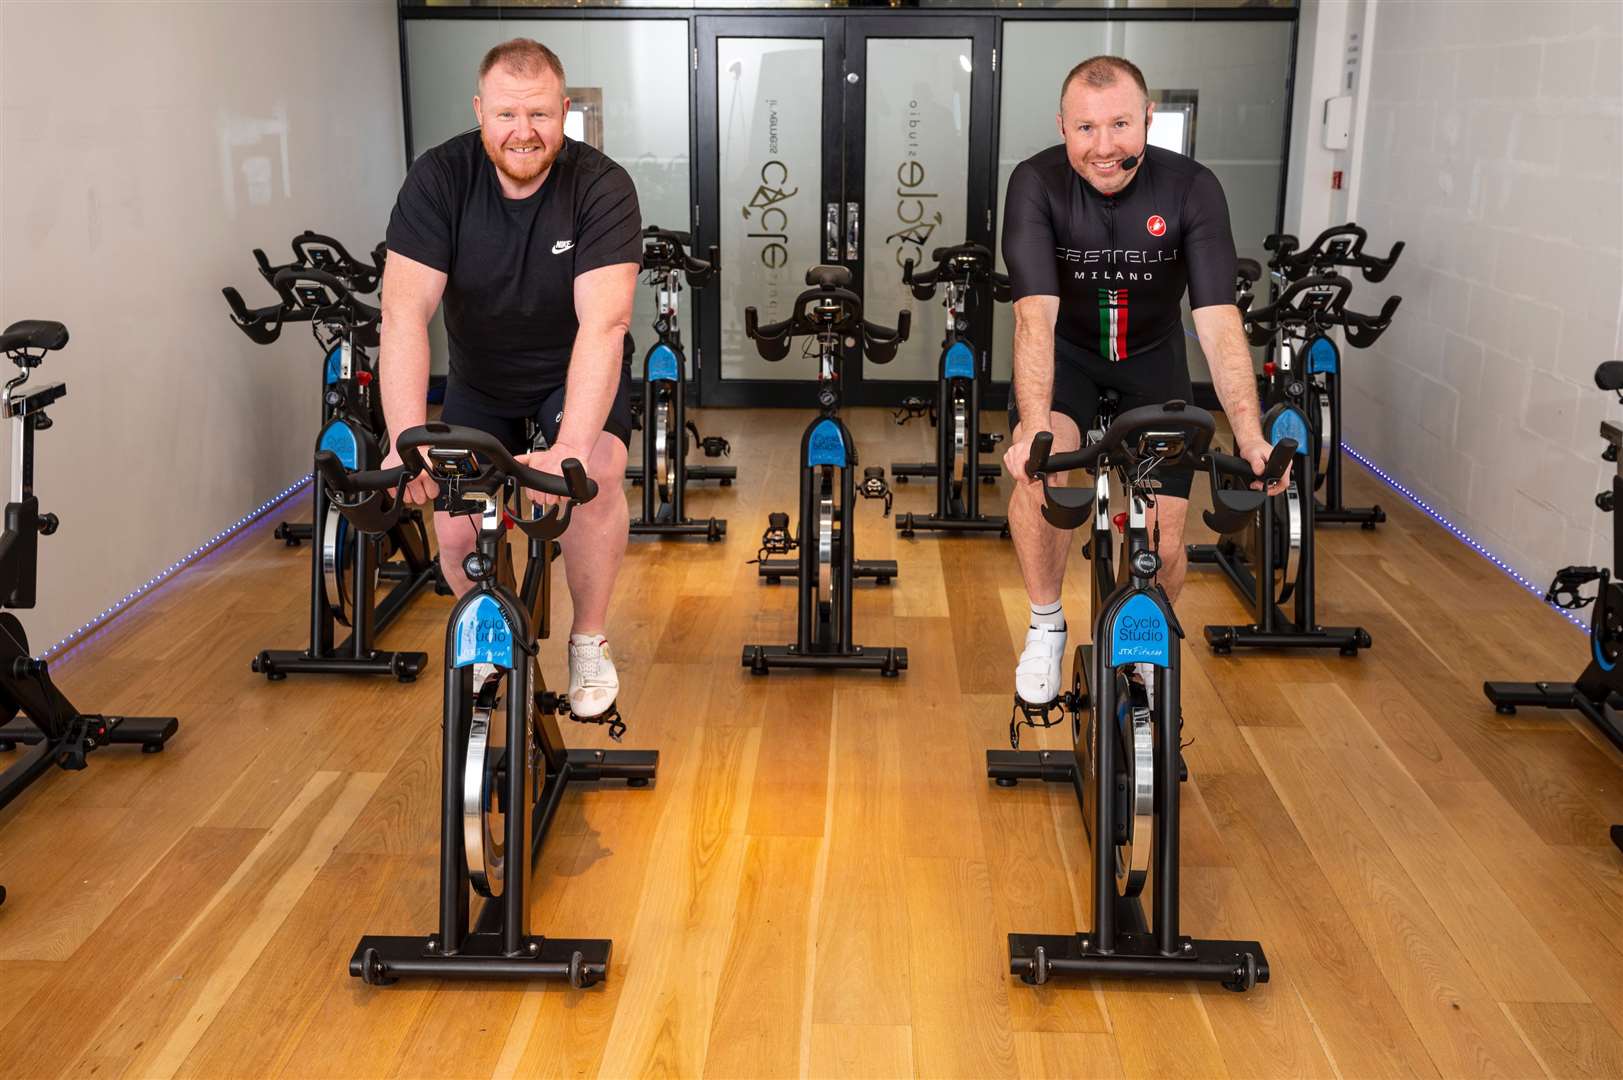 Drew Milne and Scott Murray at Inverness Cycle Studio just before official opening earlier this year